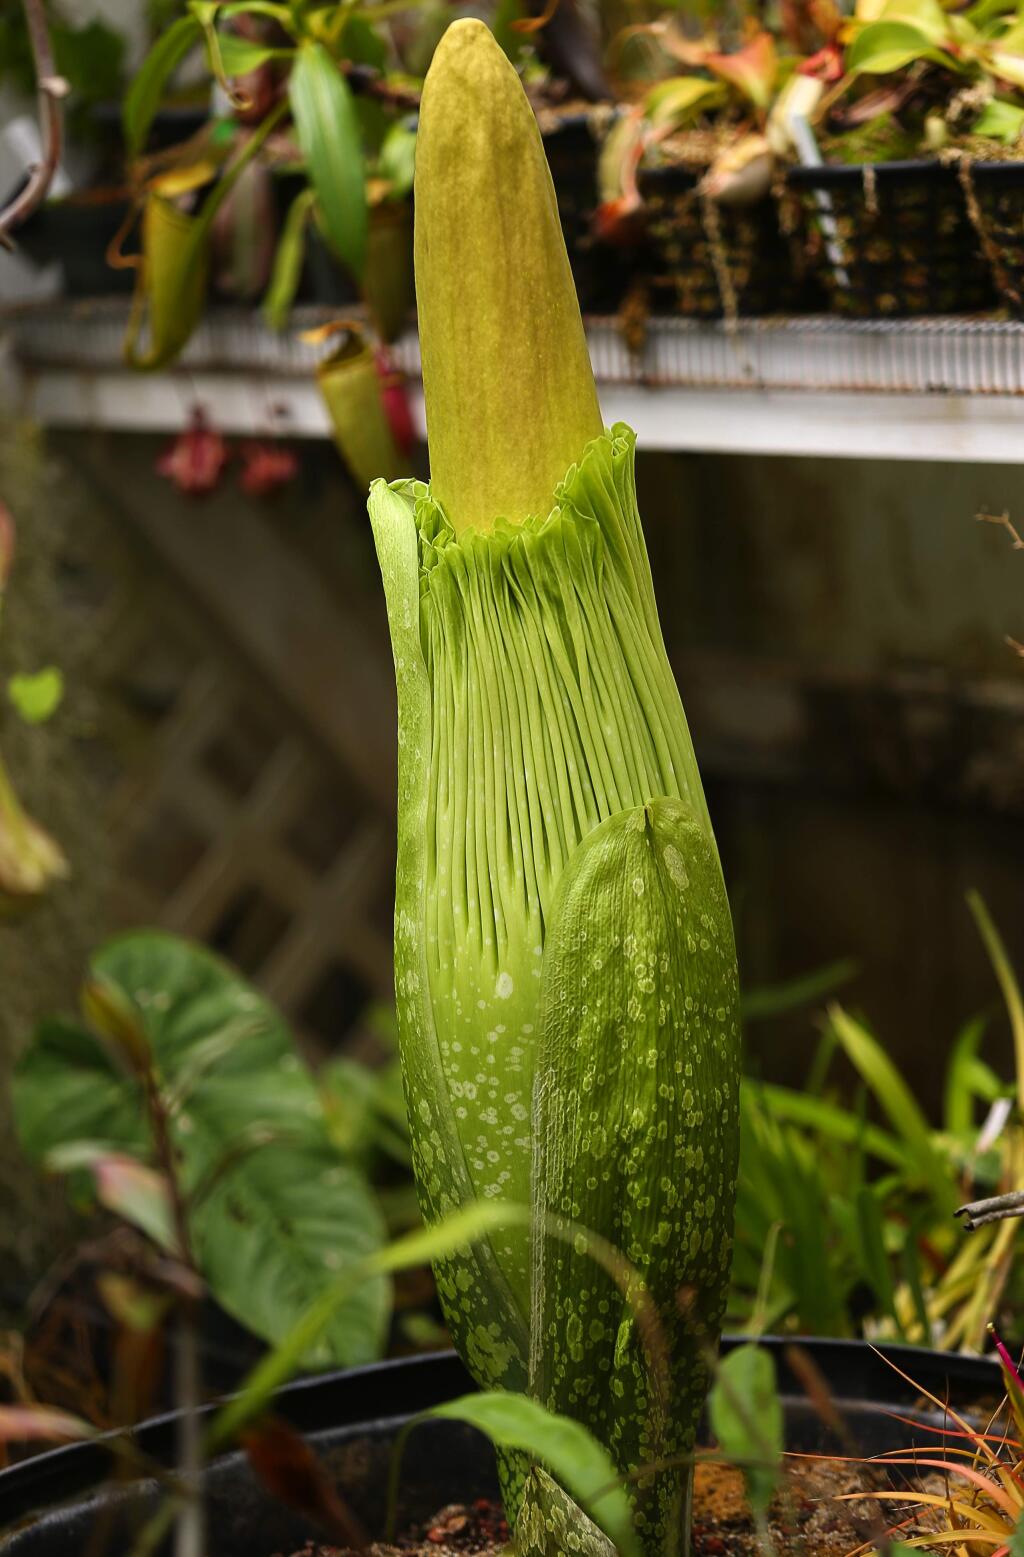 The Amorphophallus titanium, known as the titan arum or 'corpse flower', at California Carnivores, near Sebastopol, is one of the largest and rarest flowering plants in the world. (Christopher Chung/ The Press Democrat)